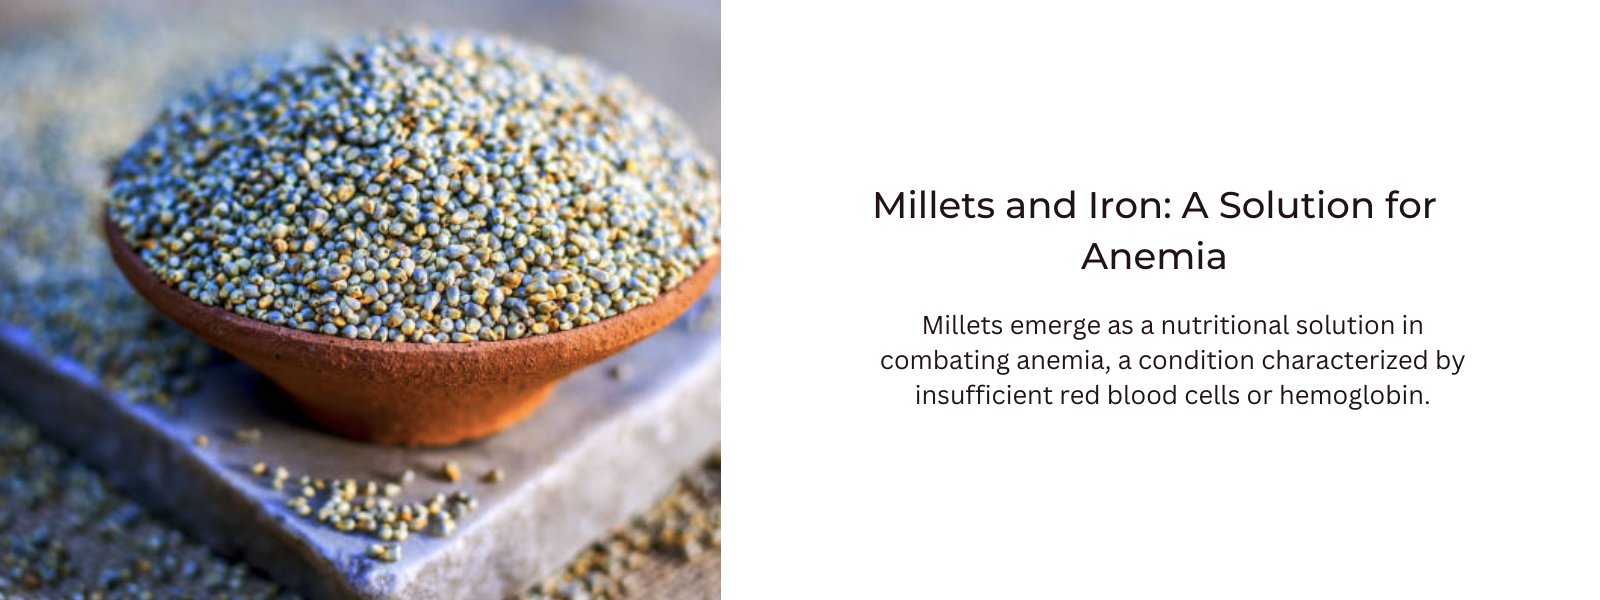 Millets and Iron: A Solution for Anemia